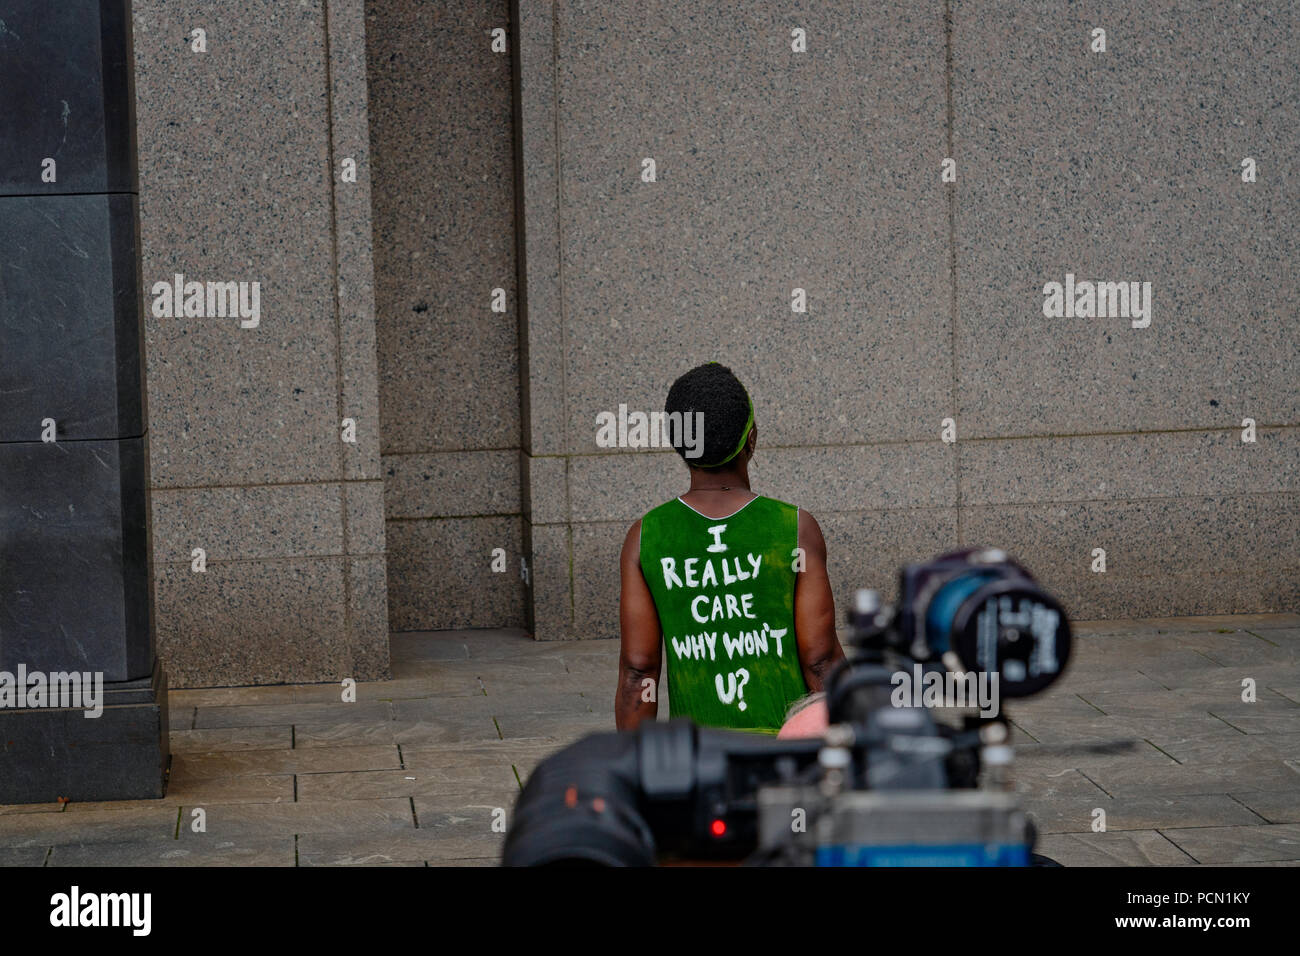 New York, New York, U.S., 3 August 2018  Immigration activist Therese Patricia Okoumou speaks outside federal court in Manhattan after hearing on trespassing & disorderly conduct charges.  Okoumou, a native of Congo, scaled the base of the Statue of Liberty on July 4, 2018, to protest against Trump administration immigration policies.  Okoumou wore a green dress to court bearing the words “I really care why won’t u?” – a response to first lady Melania Trump, who wore a jacket with the words “I really don’t care, do u?” when she visited a facility for migrant children in June. Stock Photo